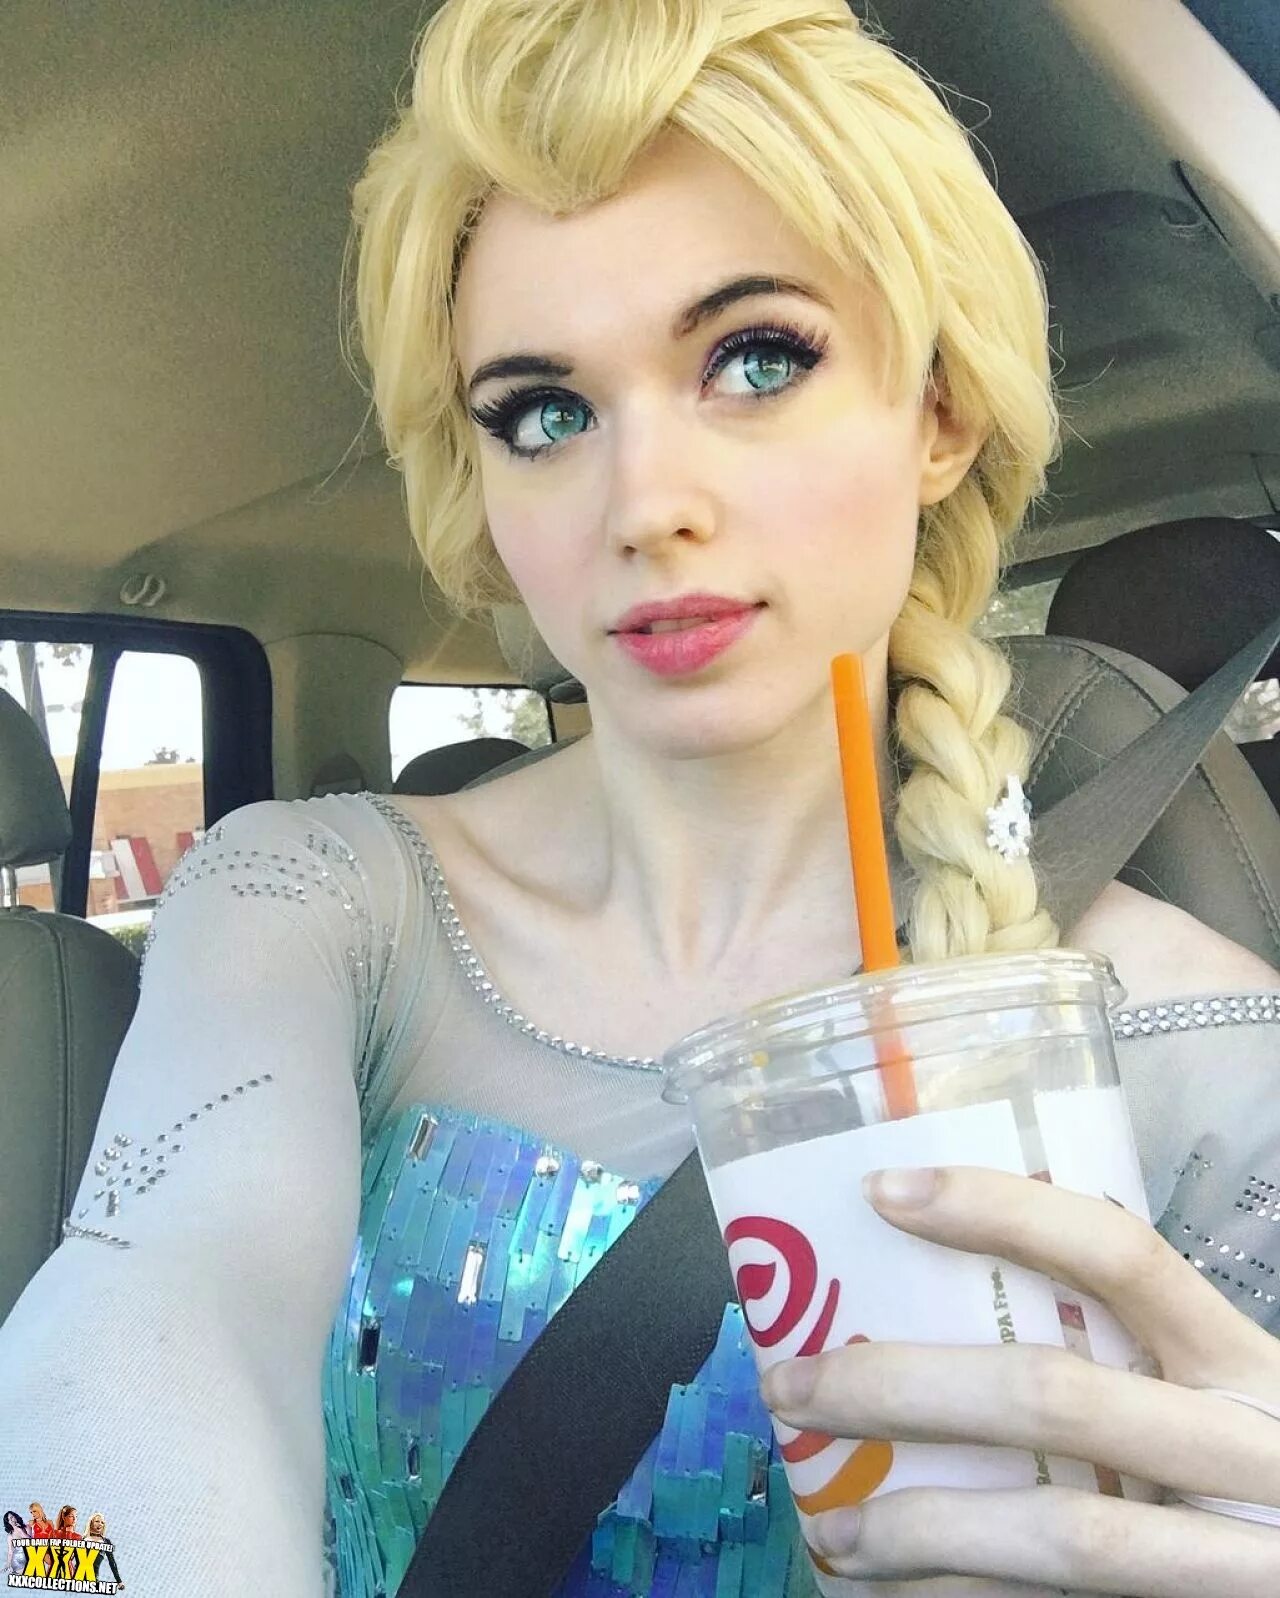 Amouranth Дафна. Amouranth Daenerys. Amouranth 2022. Amouranth АСМР. Patreon content